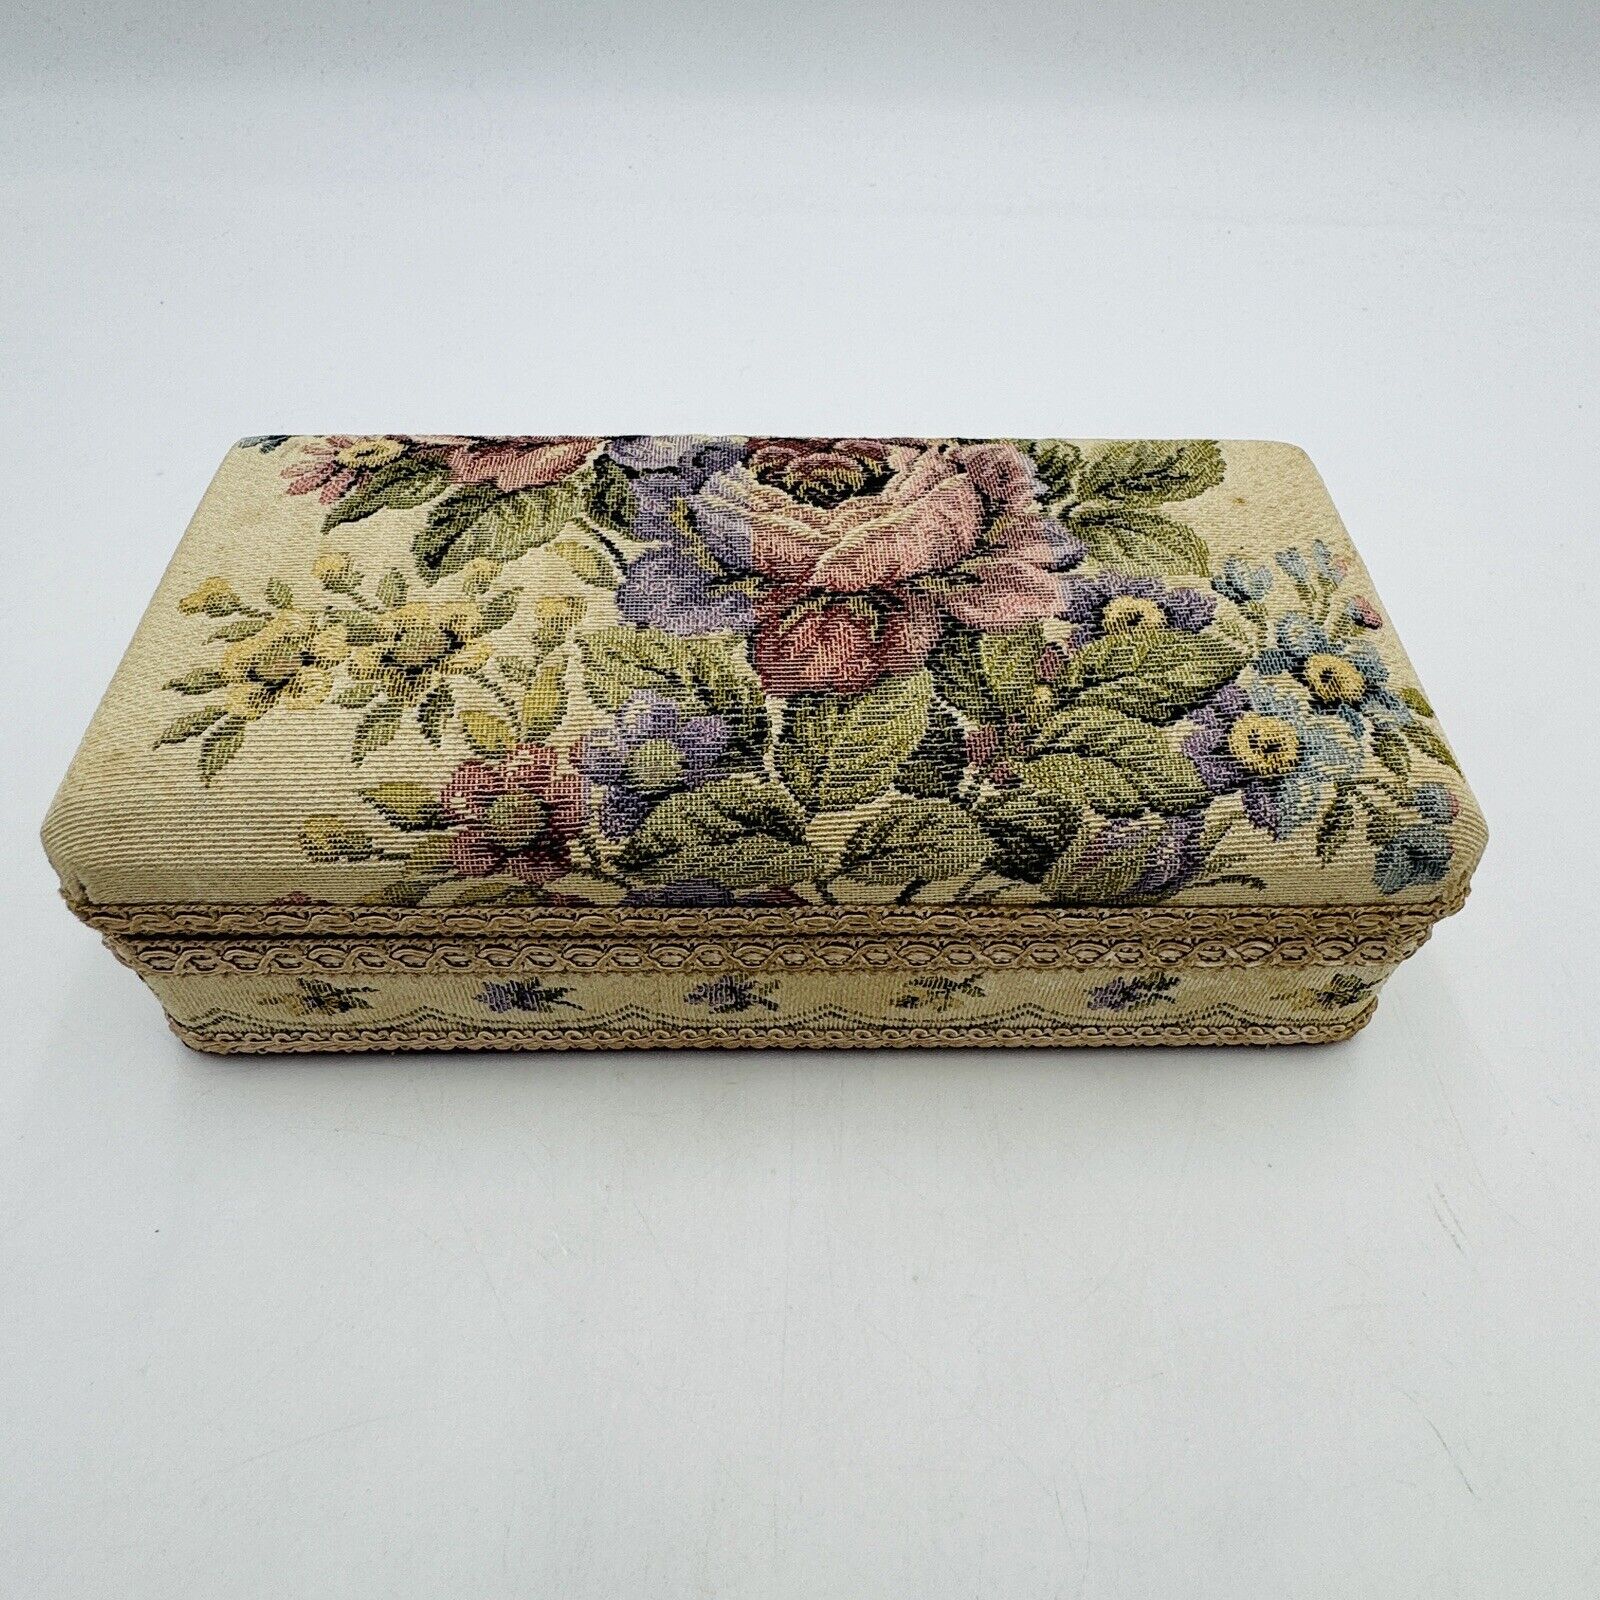 Schmid Bros Music Jewelry Box Brocaded Tapestry Floral Musical Works Vintage